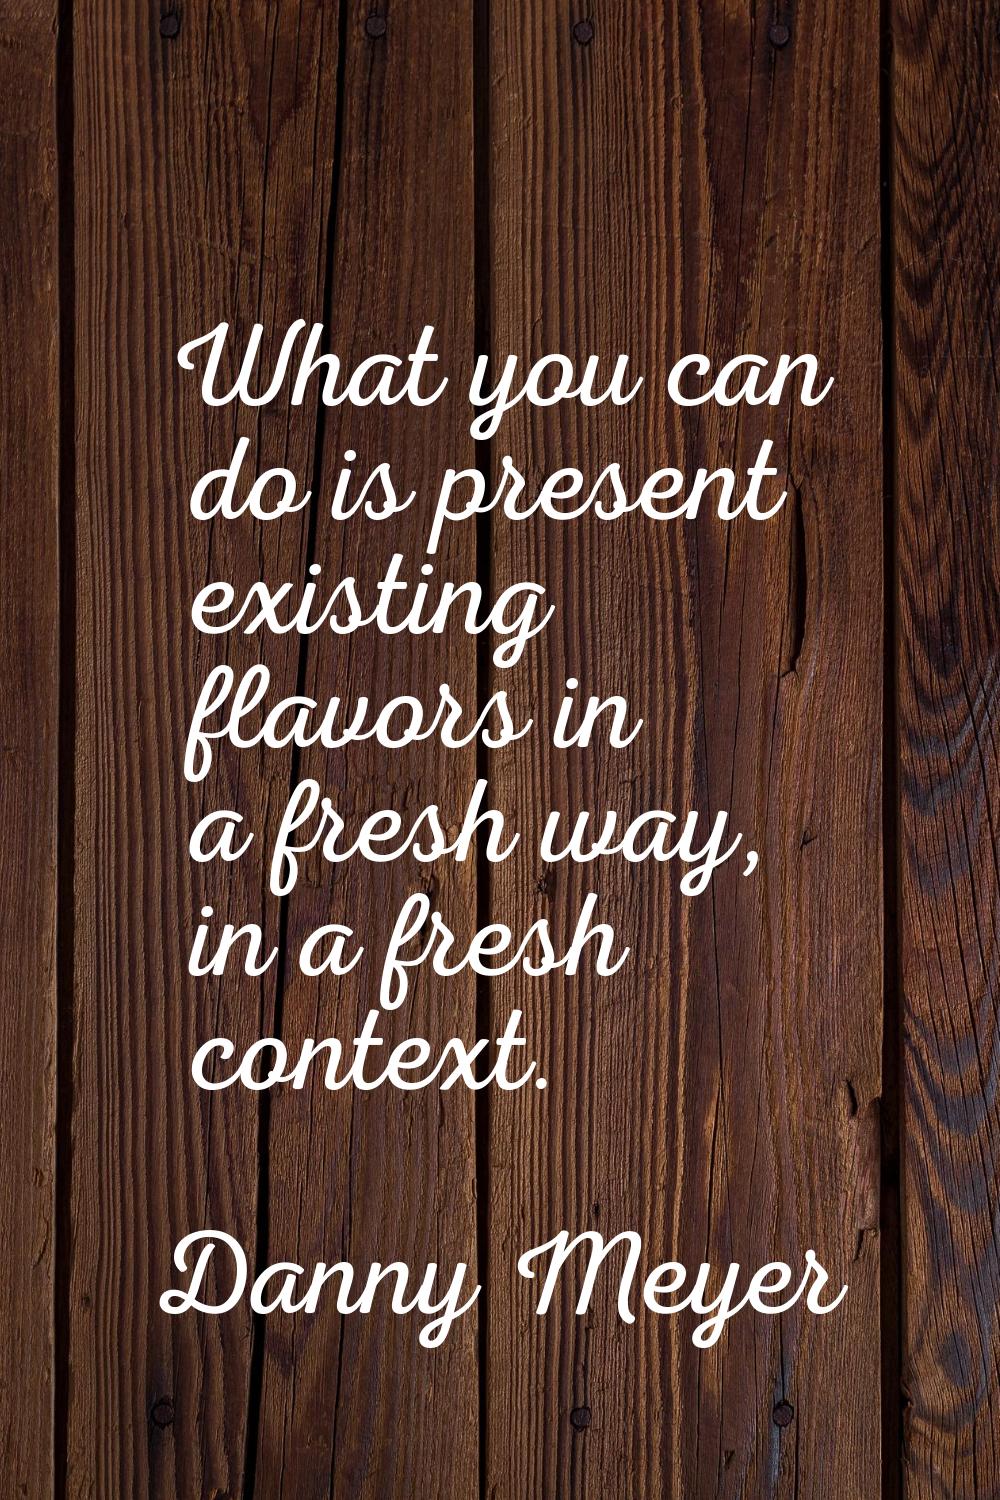 What you can do is present existing flavors in a fresh way, in a fresh context.